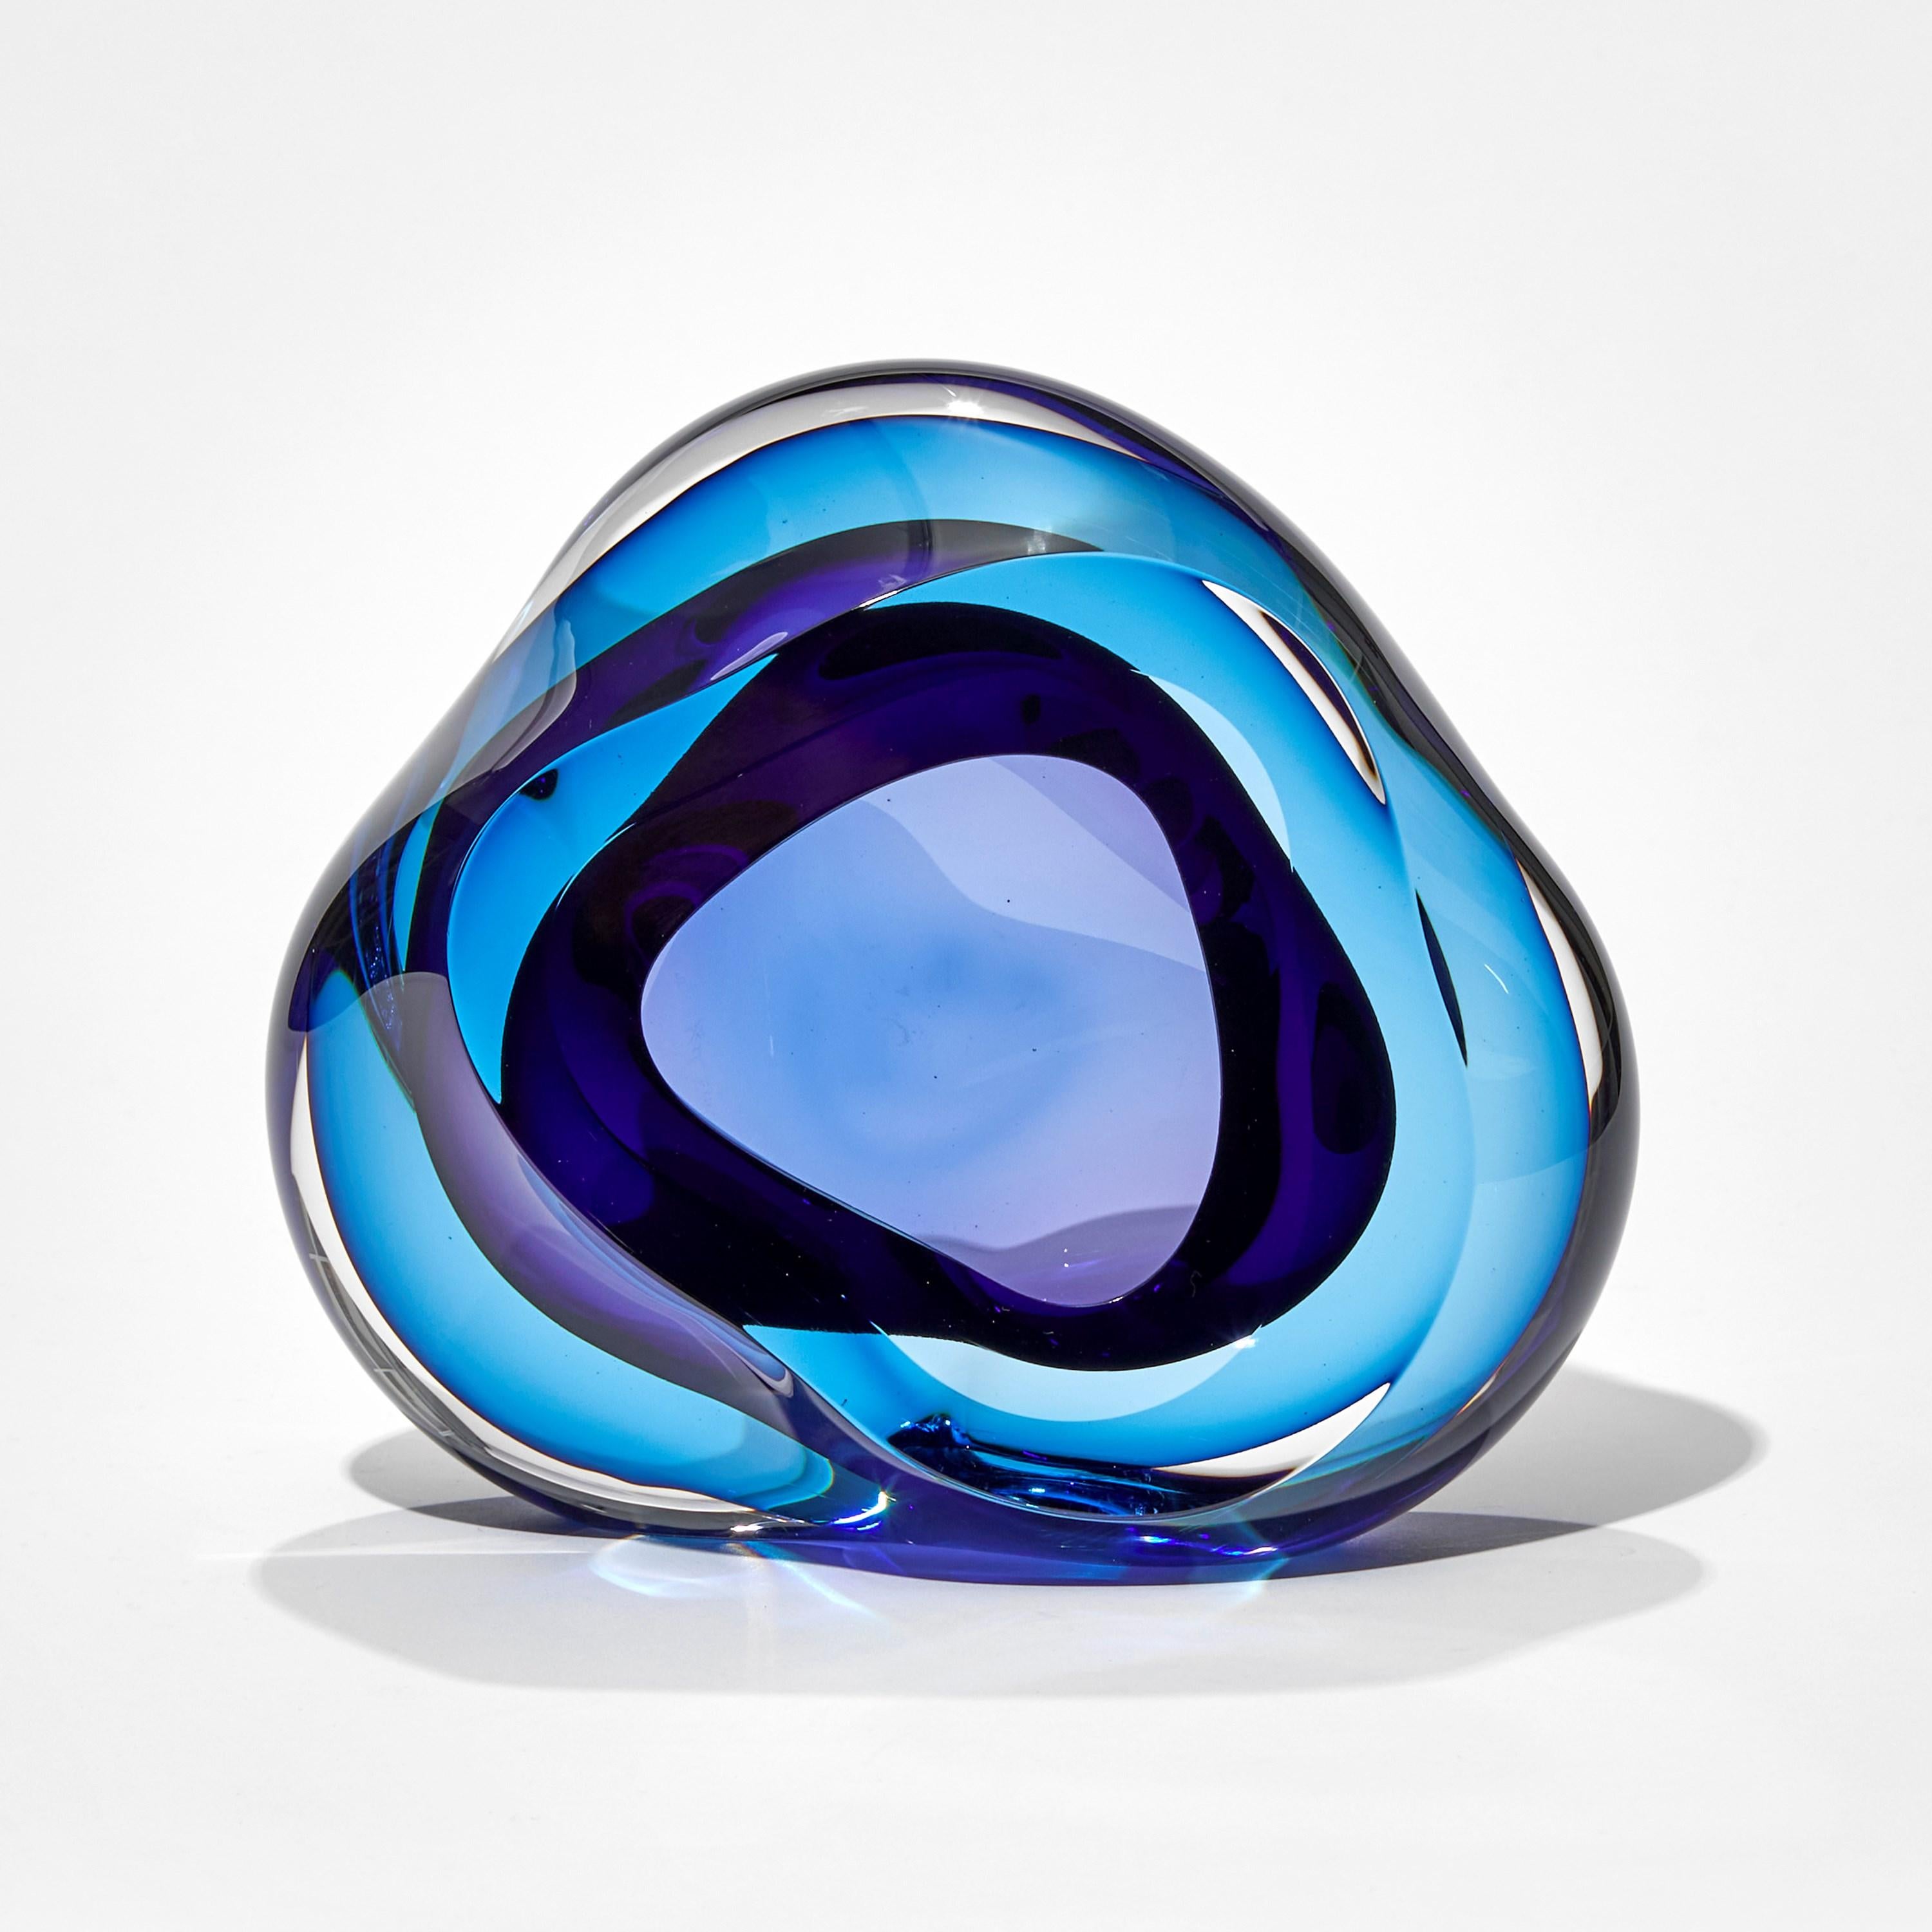 Vug in Turquoise and Purple II is a unique hand-blown sculpture by the British artist Samantha Donaldson. Created by layers of colored glass in deep blue and rich purple, the transparent colors merge and create further hues throughout the piece. An